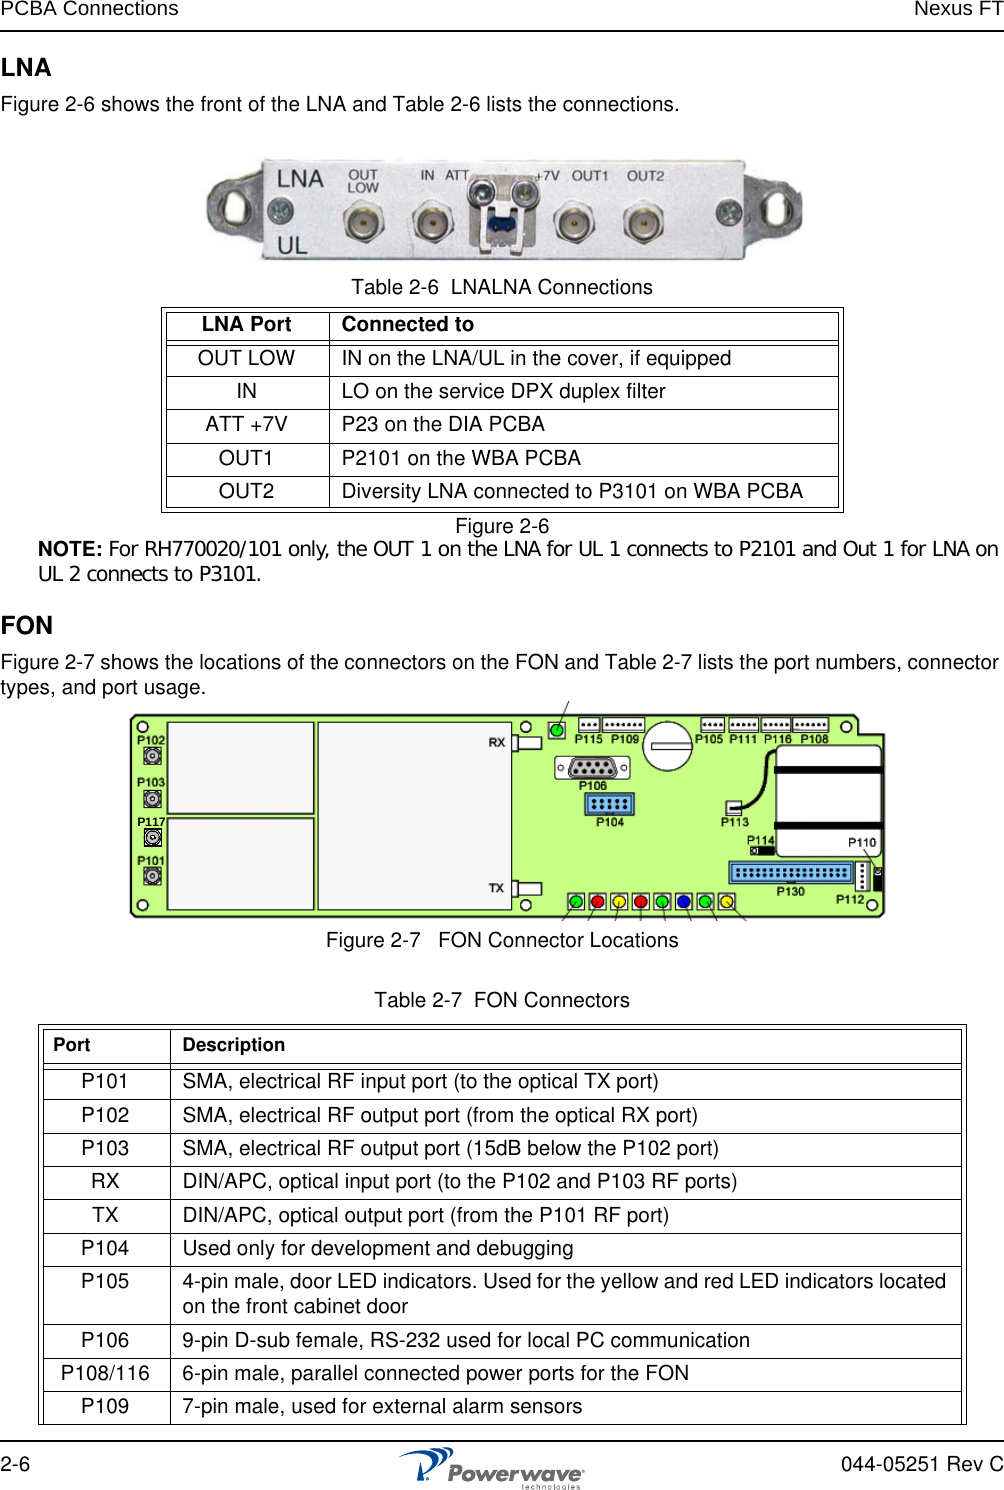 PCBA Connections Nexus FT2-6 044-05251 Rev CLNAFigure 2-6 shows the front of the LNA and Table 2-6 lists the connections.Table 2-6  LNALNA ConnectionsFigure 2-6   NOTE: For RH770020/101 only, the OUT 1 on the LNA for UL 1 connects to P2101 and Out 1 for LNA on UL 2 connects to P3101.FONFigure 2-7 shows the locations of the connectors on the FON and Table 2-7 lists the port numbers, connector types, and port usage. Figure 2-7   FON Connector LocationsLNA Port  Connected toOUT LOW IN on the LNA/UL in the cover, if equippedIN LO on the service DPX duplex filterATT +7V P23 on the DIA PCBAOUT1 P2101 on the WBA PCBAOUT2 Diversity LNA connected to P3101 on WBA PCBATable 2-7  FON Connectors Port DescriptionP101 SMA, electrical RF input port (to the optical TX port)P102 SMA, electrical RF output port (from the optical RX port)P103 SMA, electrical RF output port (15dB below the P102 port)RX DIN/APC, optical input port (to the P102 and P103 RF ports)TX DIN/APC, optical output port (from the P101 RF port)P104 Used only for development and debuggingP105 4-pin male, door LED indicators. Used for the yellow and red LED indicators located on the front cabinet doorP106 9-pin D-sub female, RS-232 used for local PC communicationP108/116 6-pin male, parallel connected power ports for the FONP109 7-pin male, used for external alarm sensorsP117